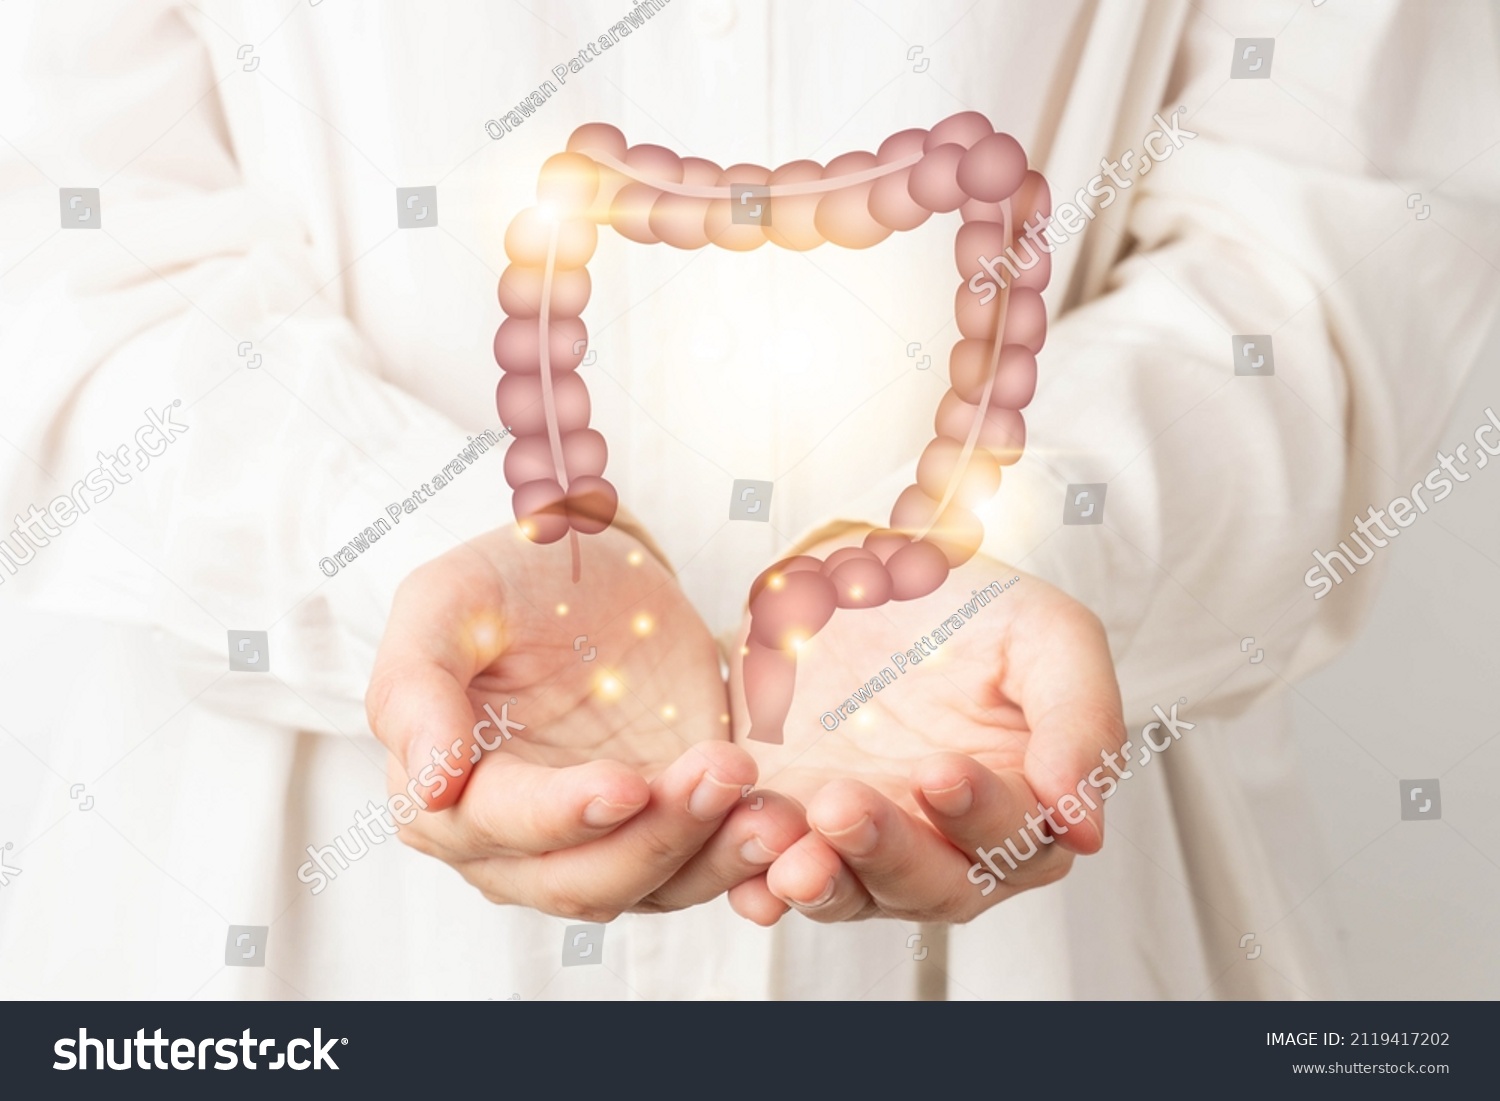 Healthy large intestine anatomy on doctor hands. Concept of healthy bowel digestion, colon cancer screening, intestinal disease treatment or colorectal cancer awareness. #2119417202